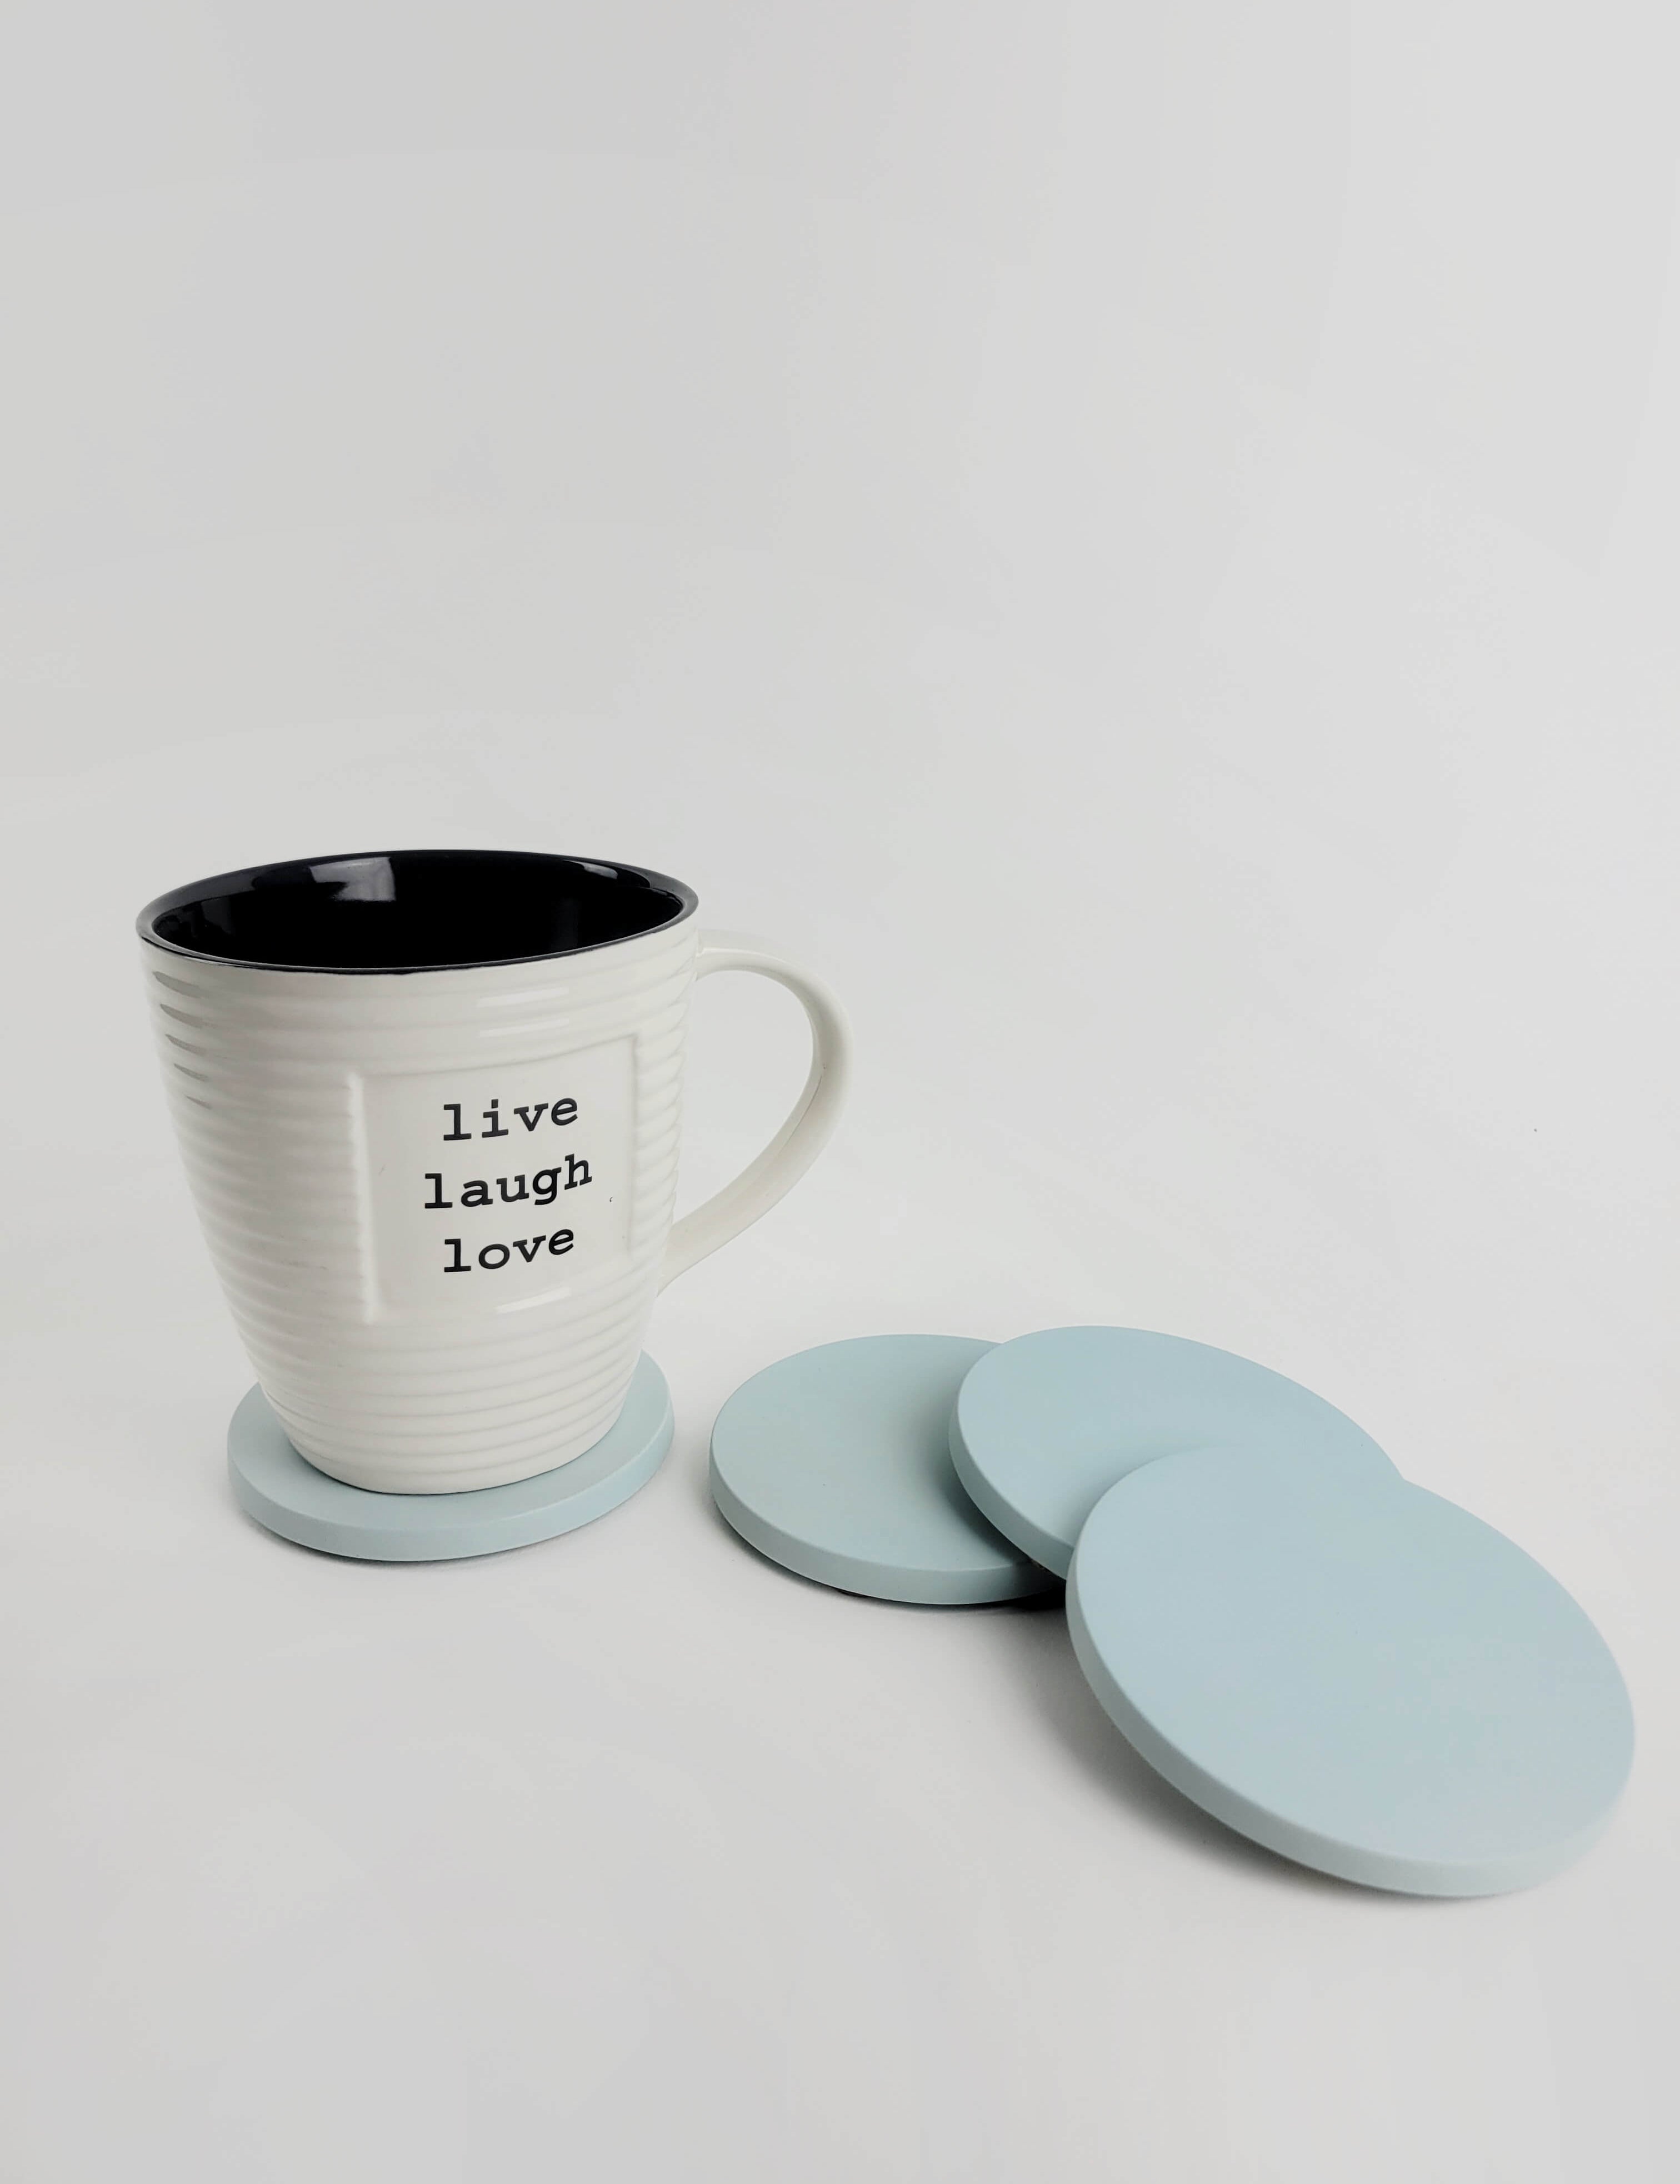 Set of 4 pastel turquoise concrete coasters with a coffee mug resting on one, showcasing elegant home decor.